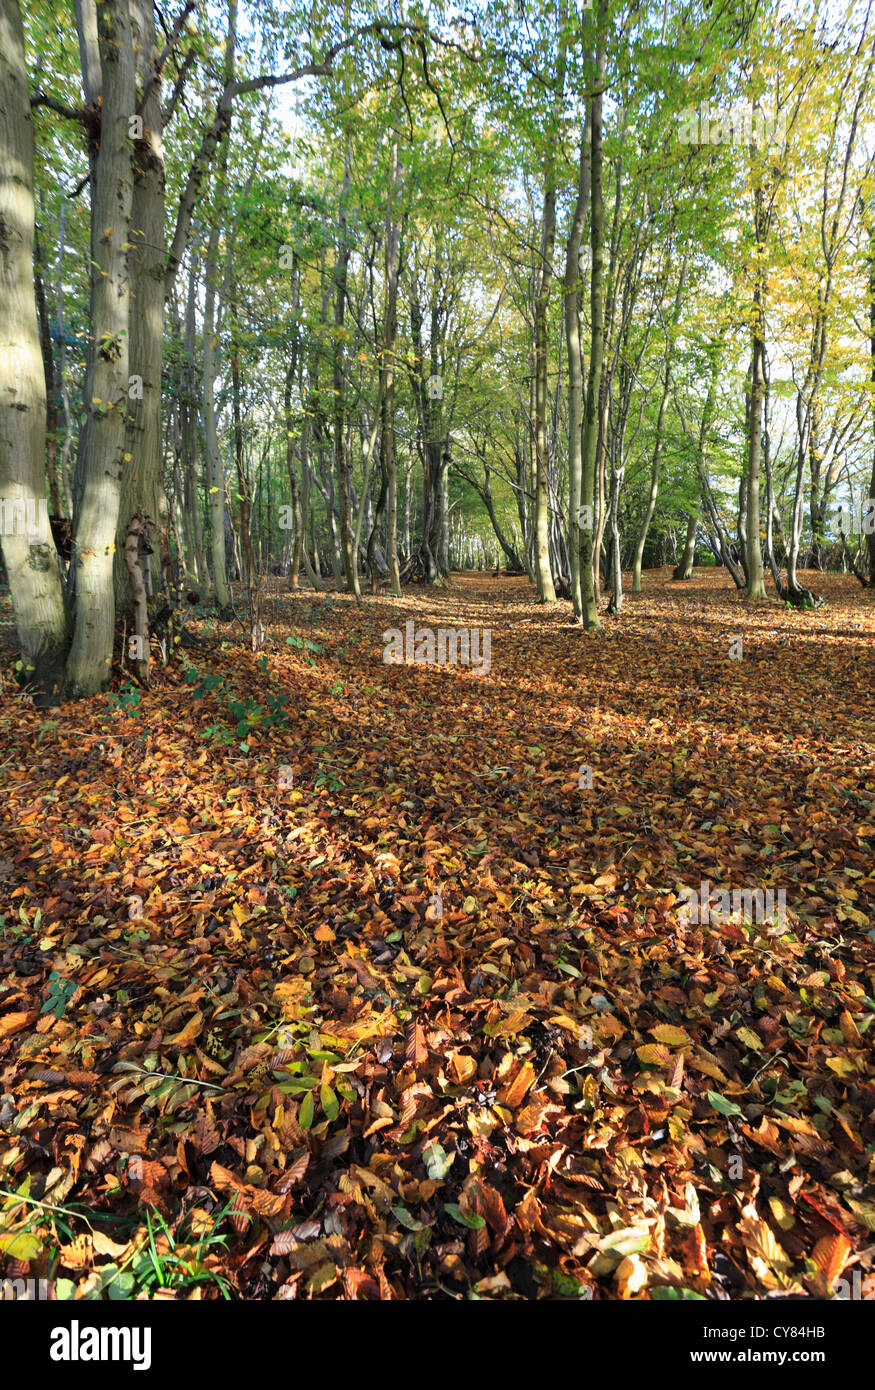 Lower Wood, Ashwellthorpe. One of the first UK sites confirmed to be affected by Ash Dieback disease. Stock Photo